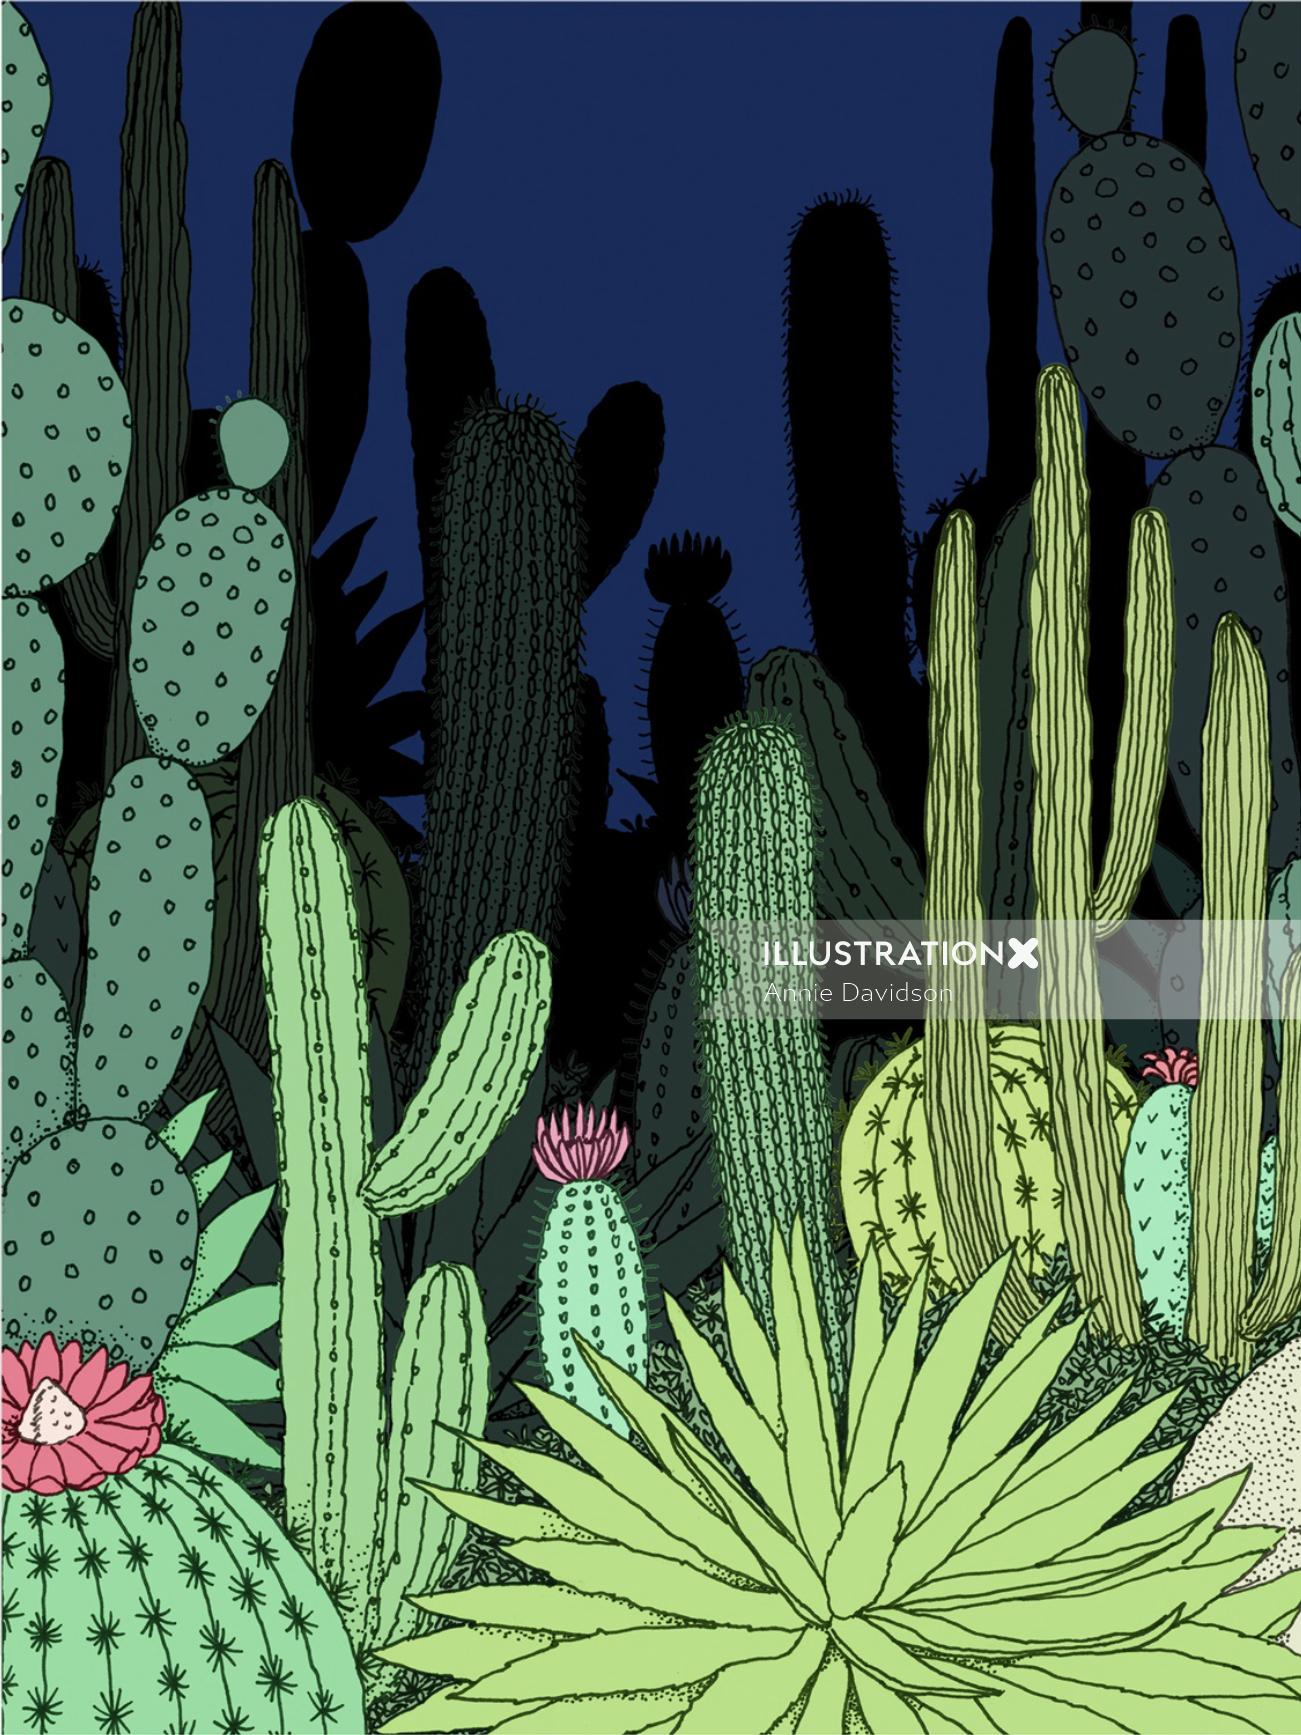 Graphical design of cacti garden in night